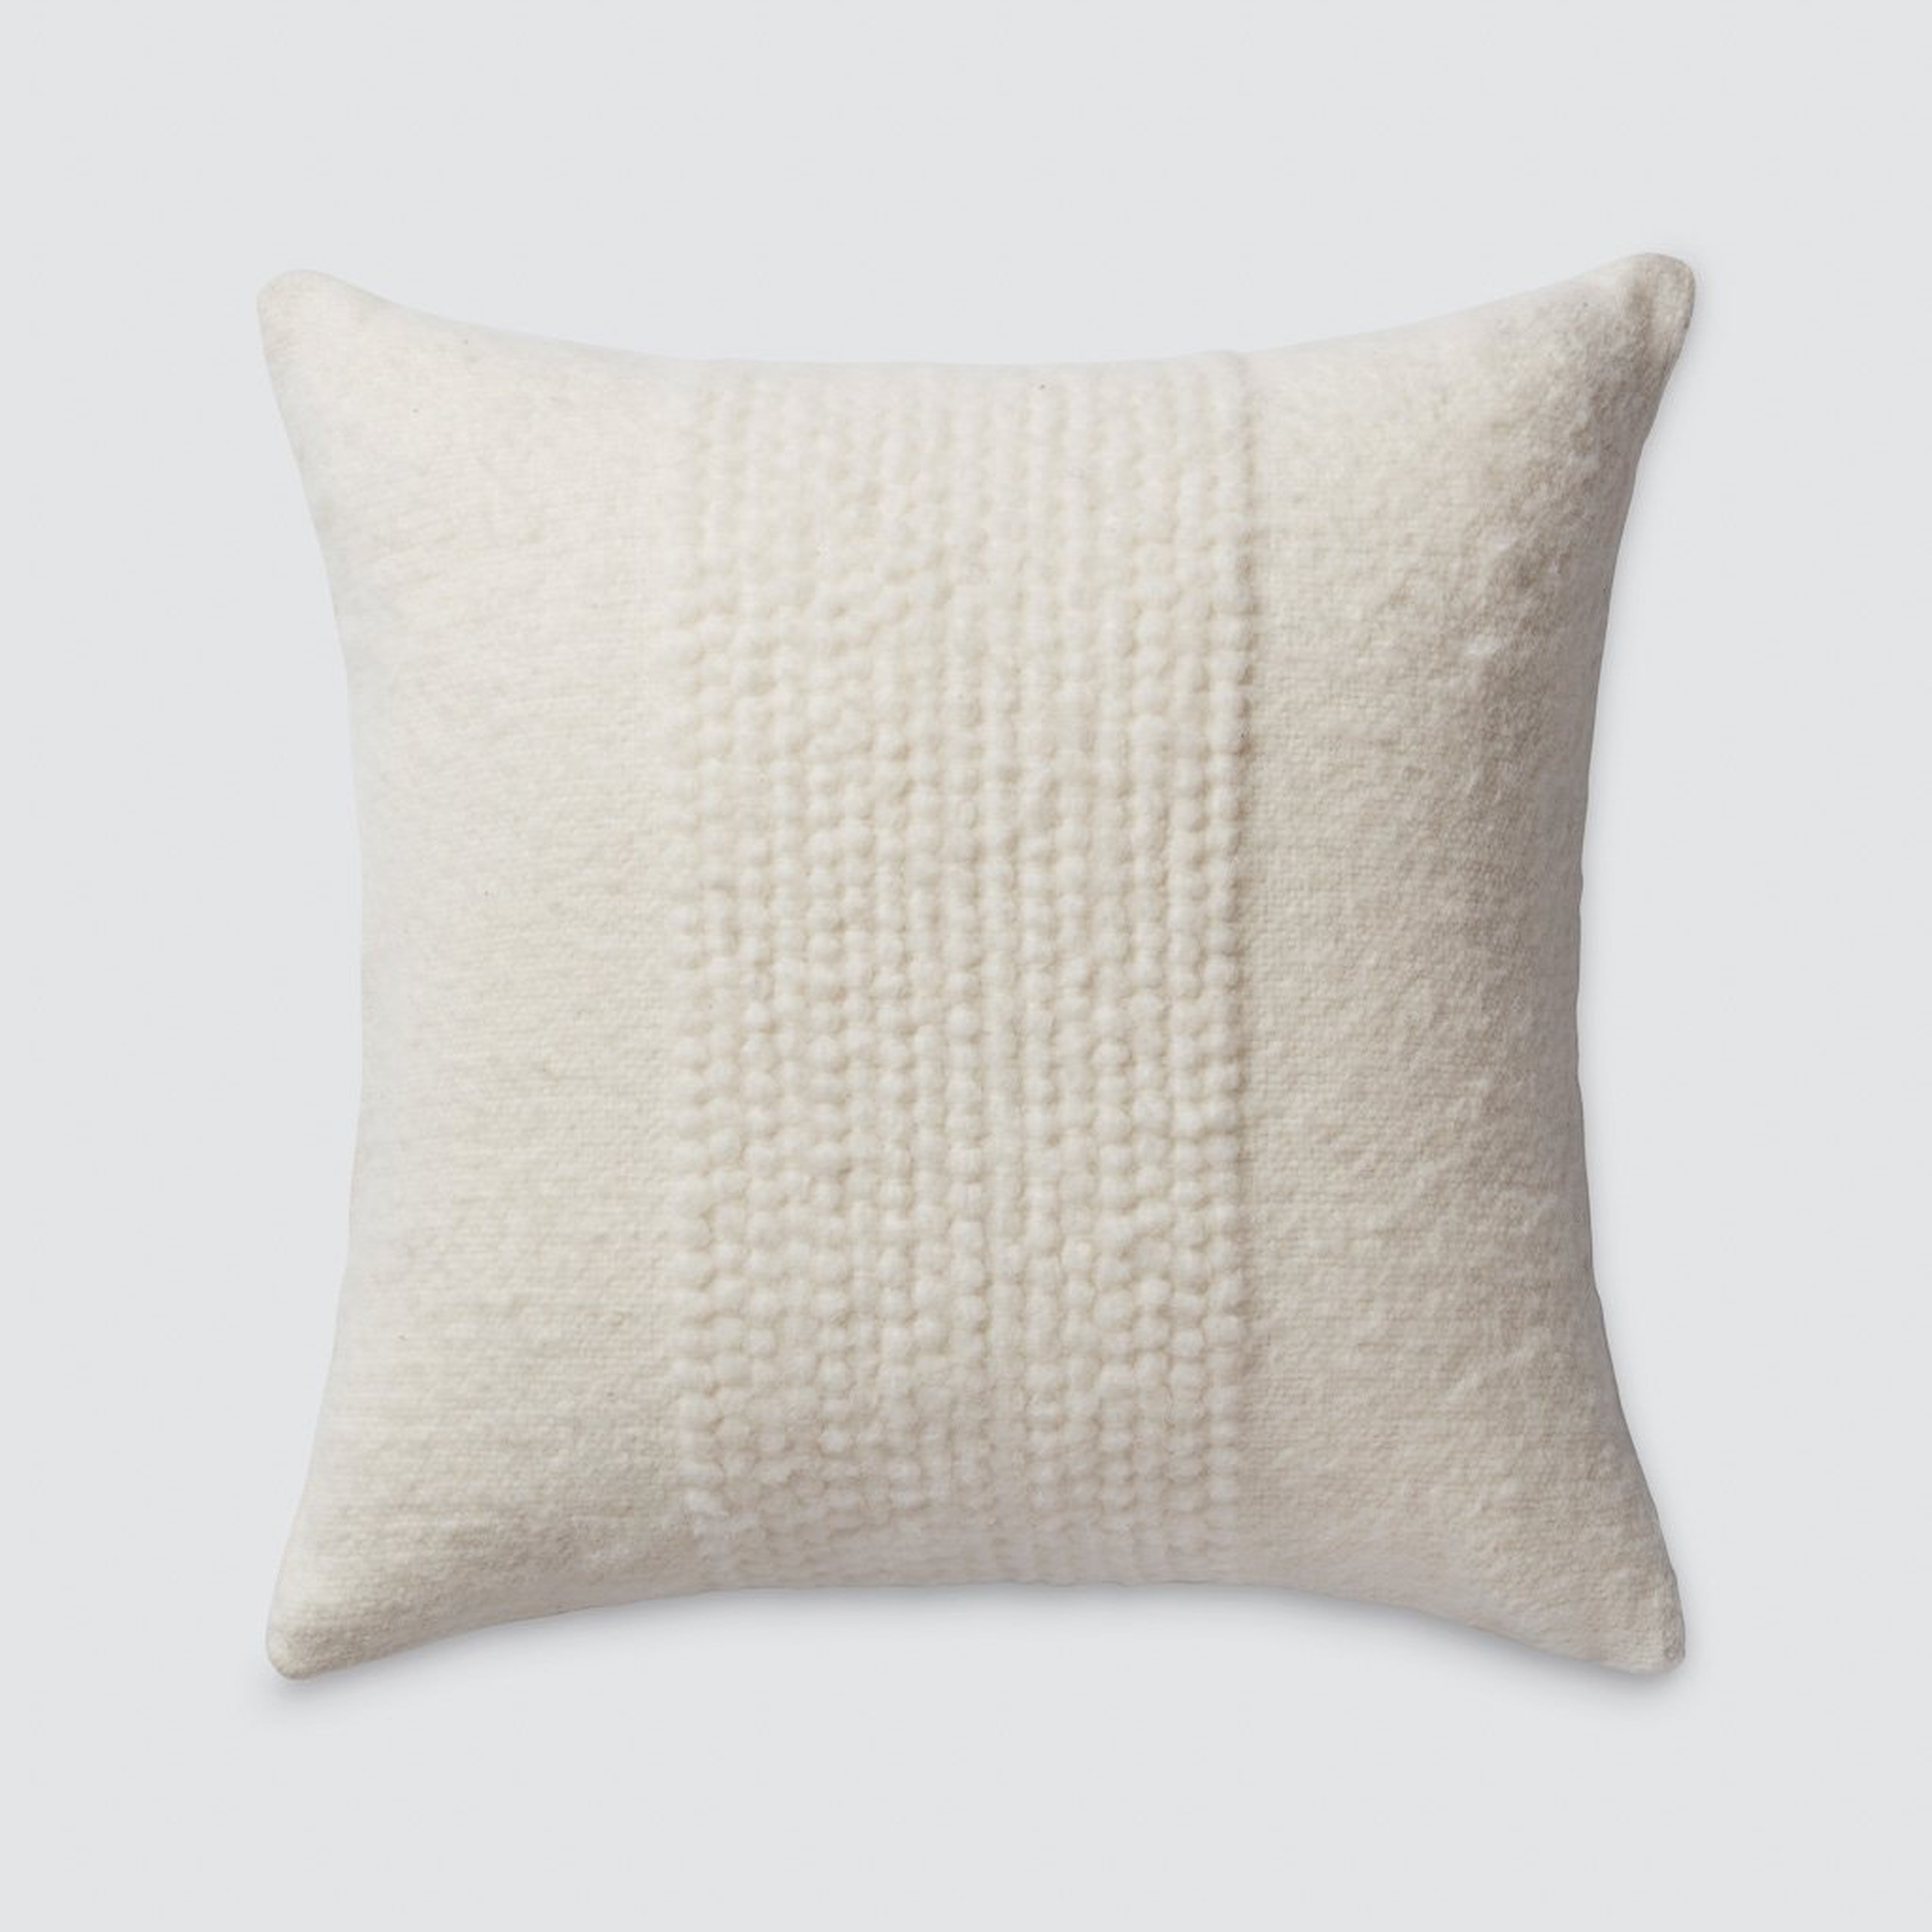 Veta Pillow - Ivory - 18'' x 18'' By The Citizenry - The Citizenry